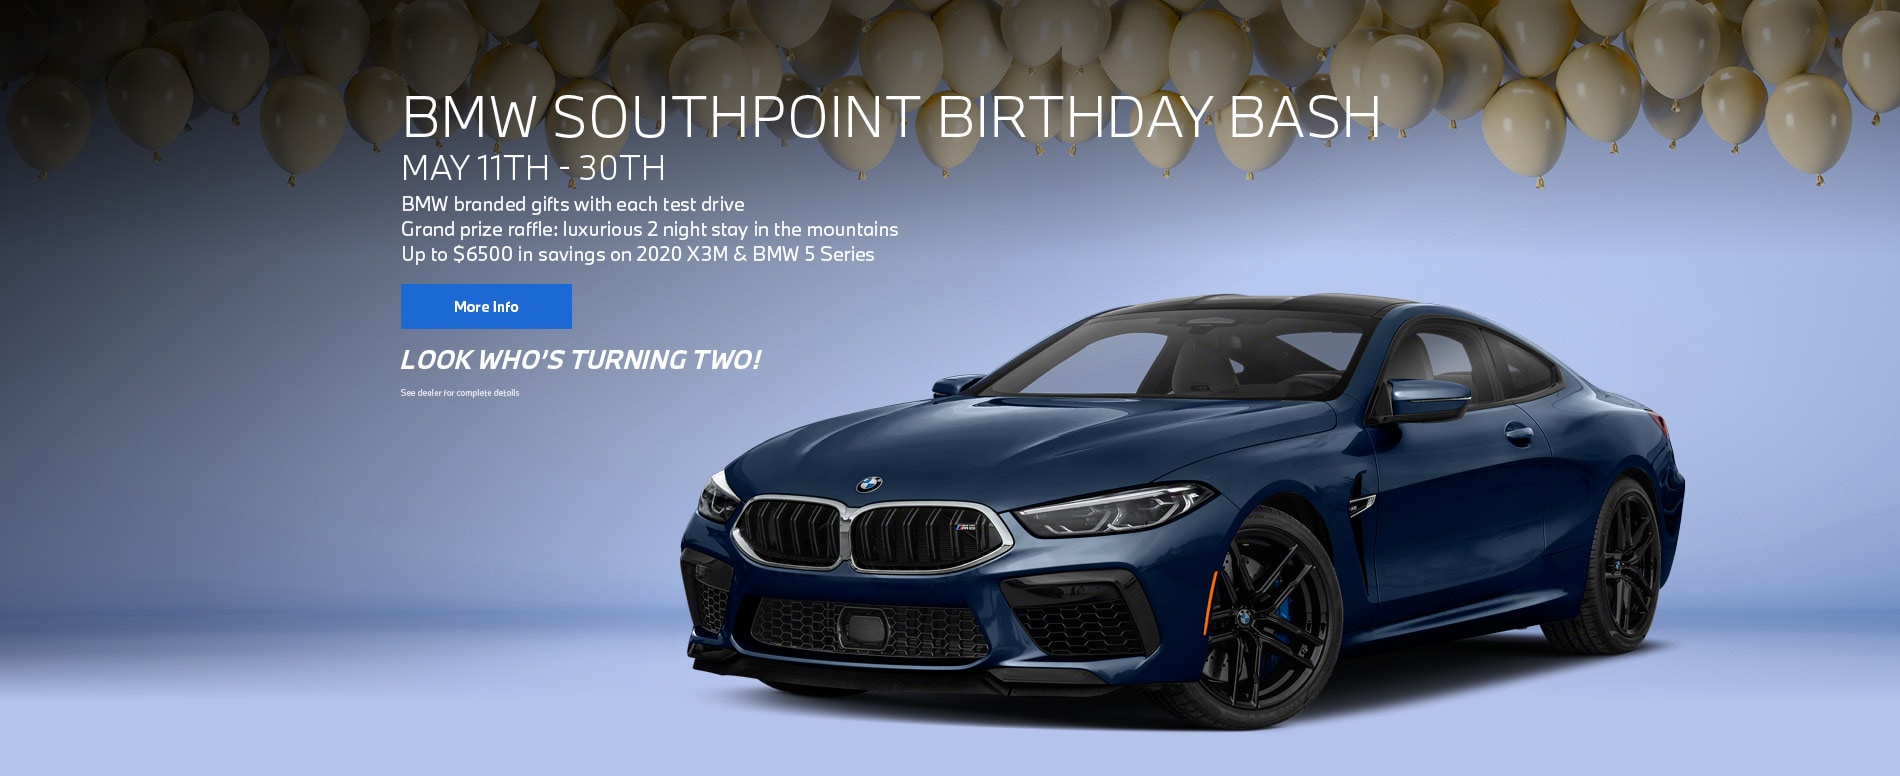 BMW of Southpoint Durham, NC - New BMW Dealer near Raleigh - Cary